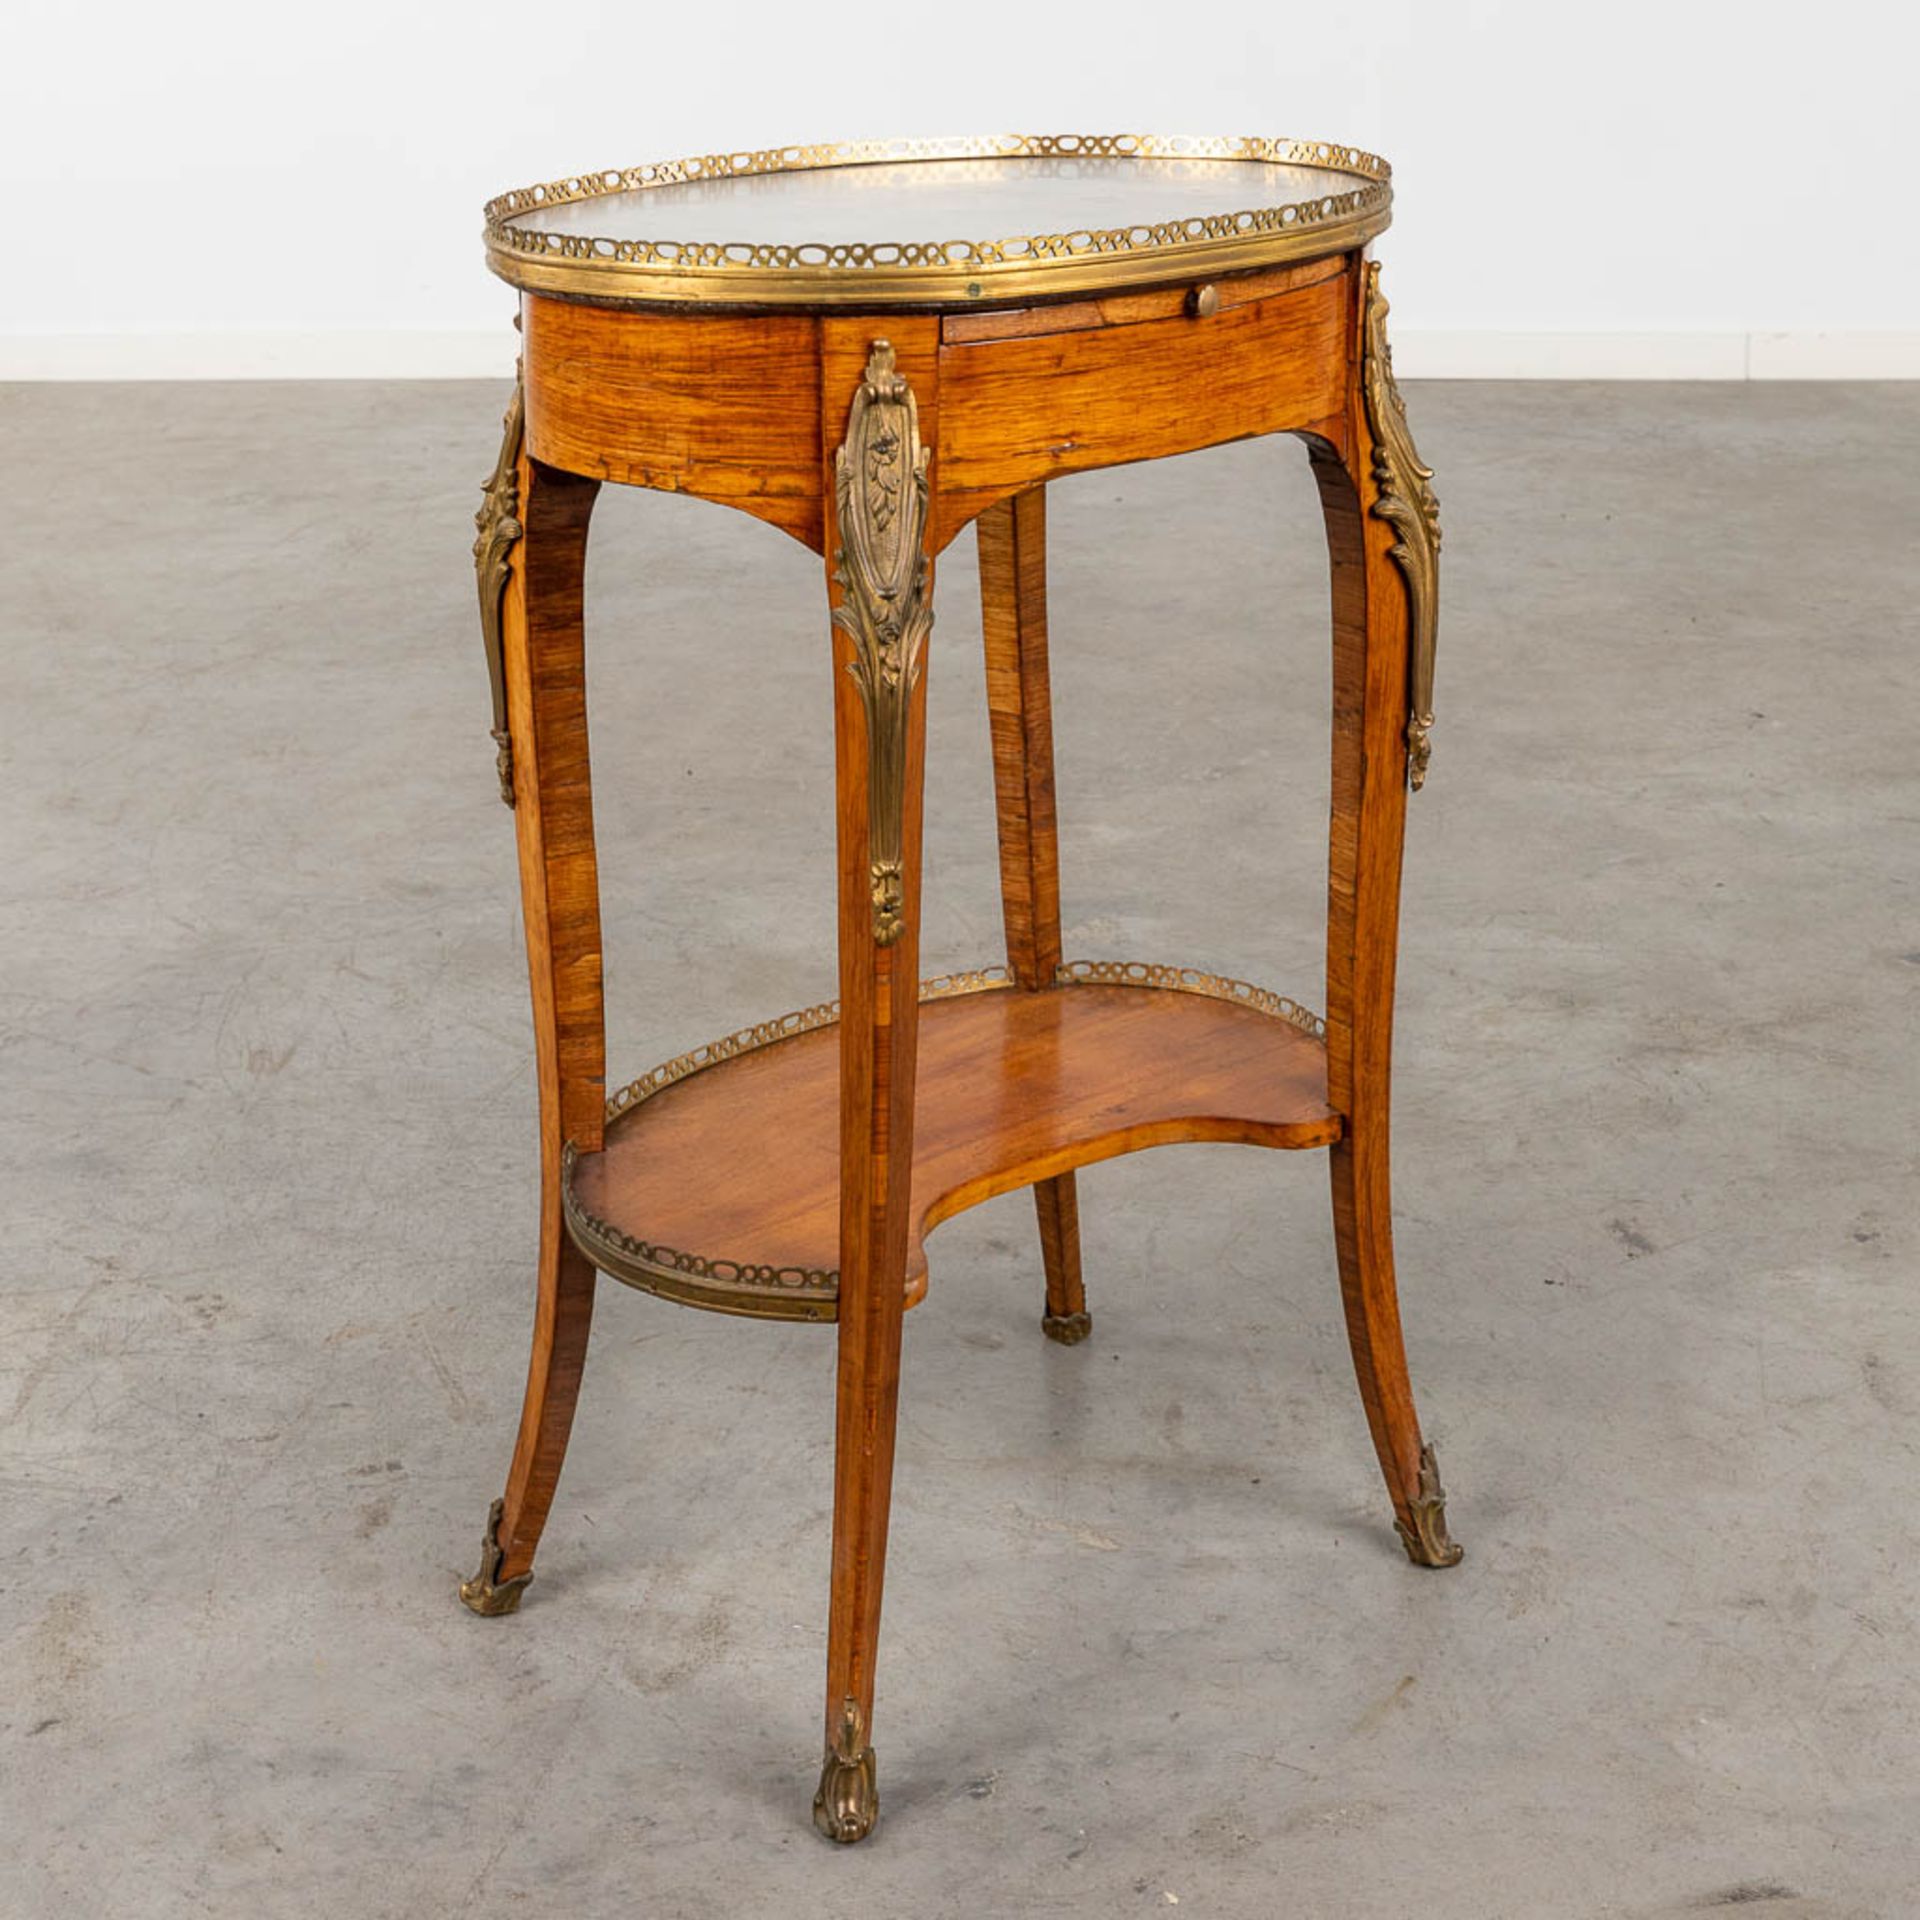 An antique side table, Louis XV, marquetry mounted with bronze and marble, 18th C. (D:38 x W:50 x H: